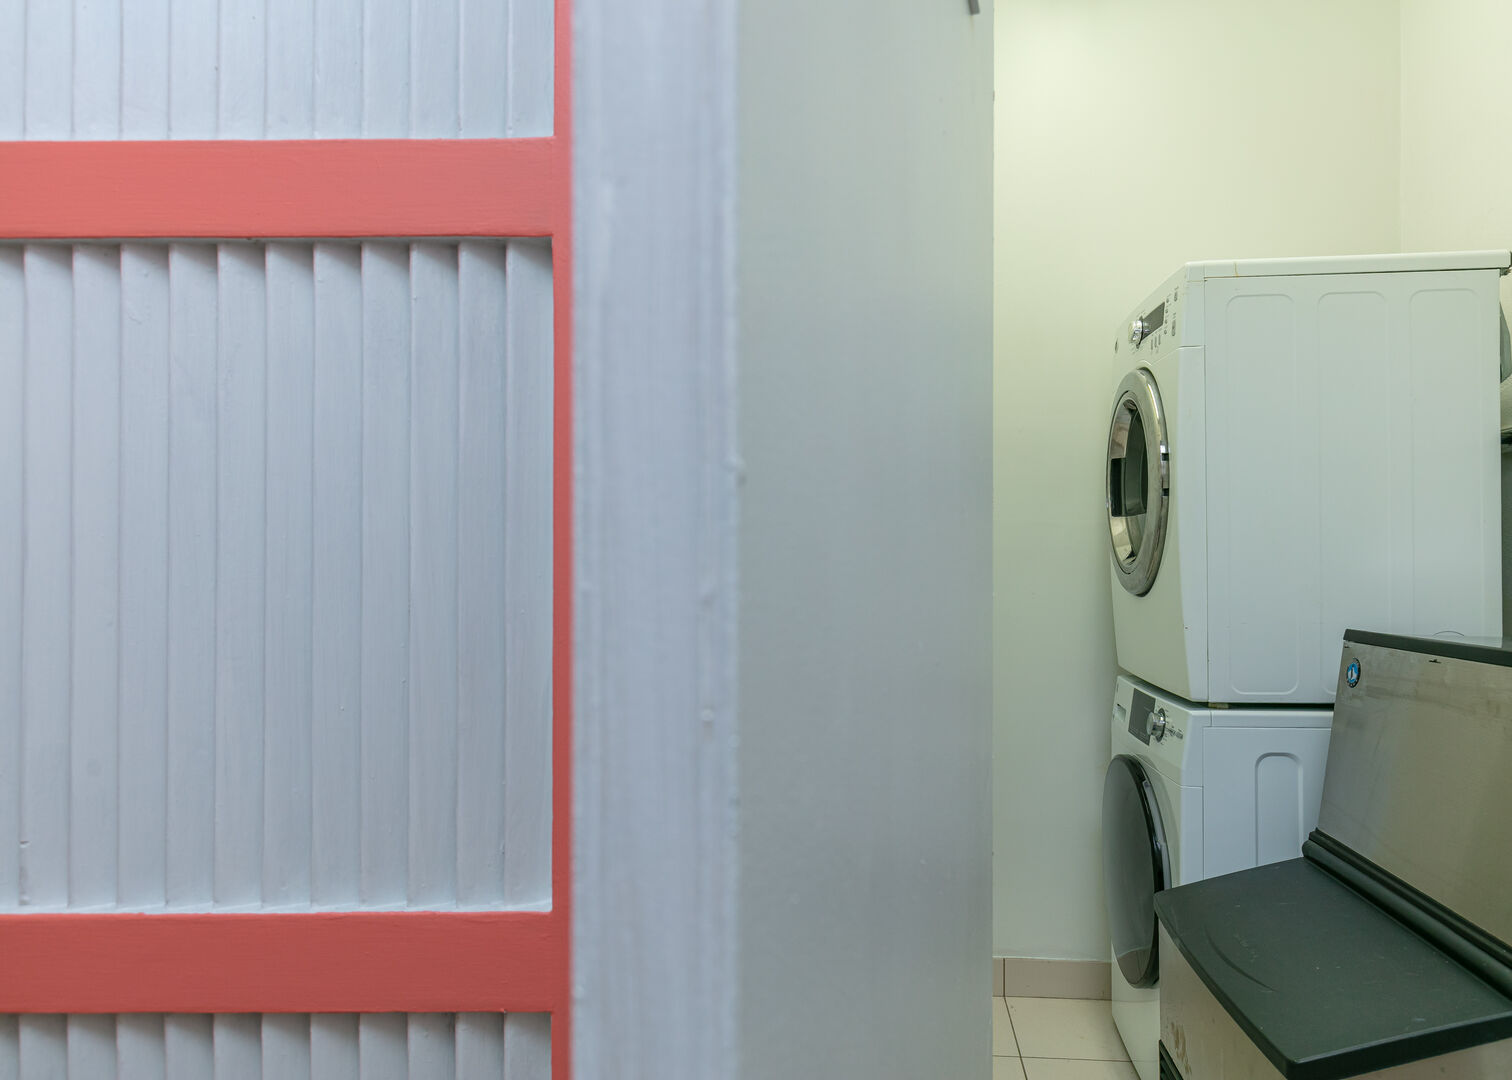 There are common area laundry facilities for guest use at Salt Aire Key.